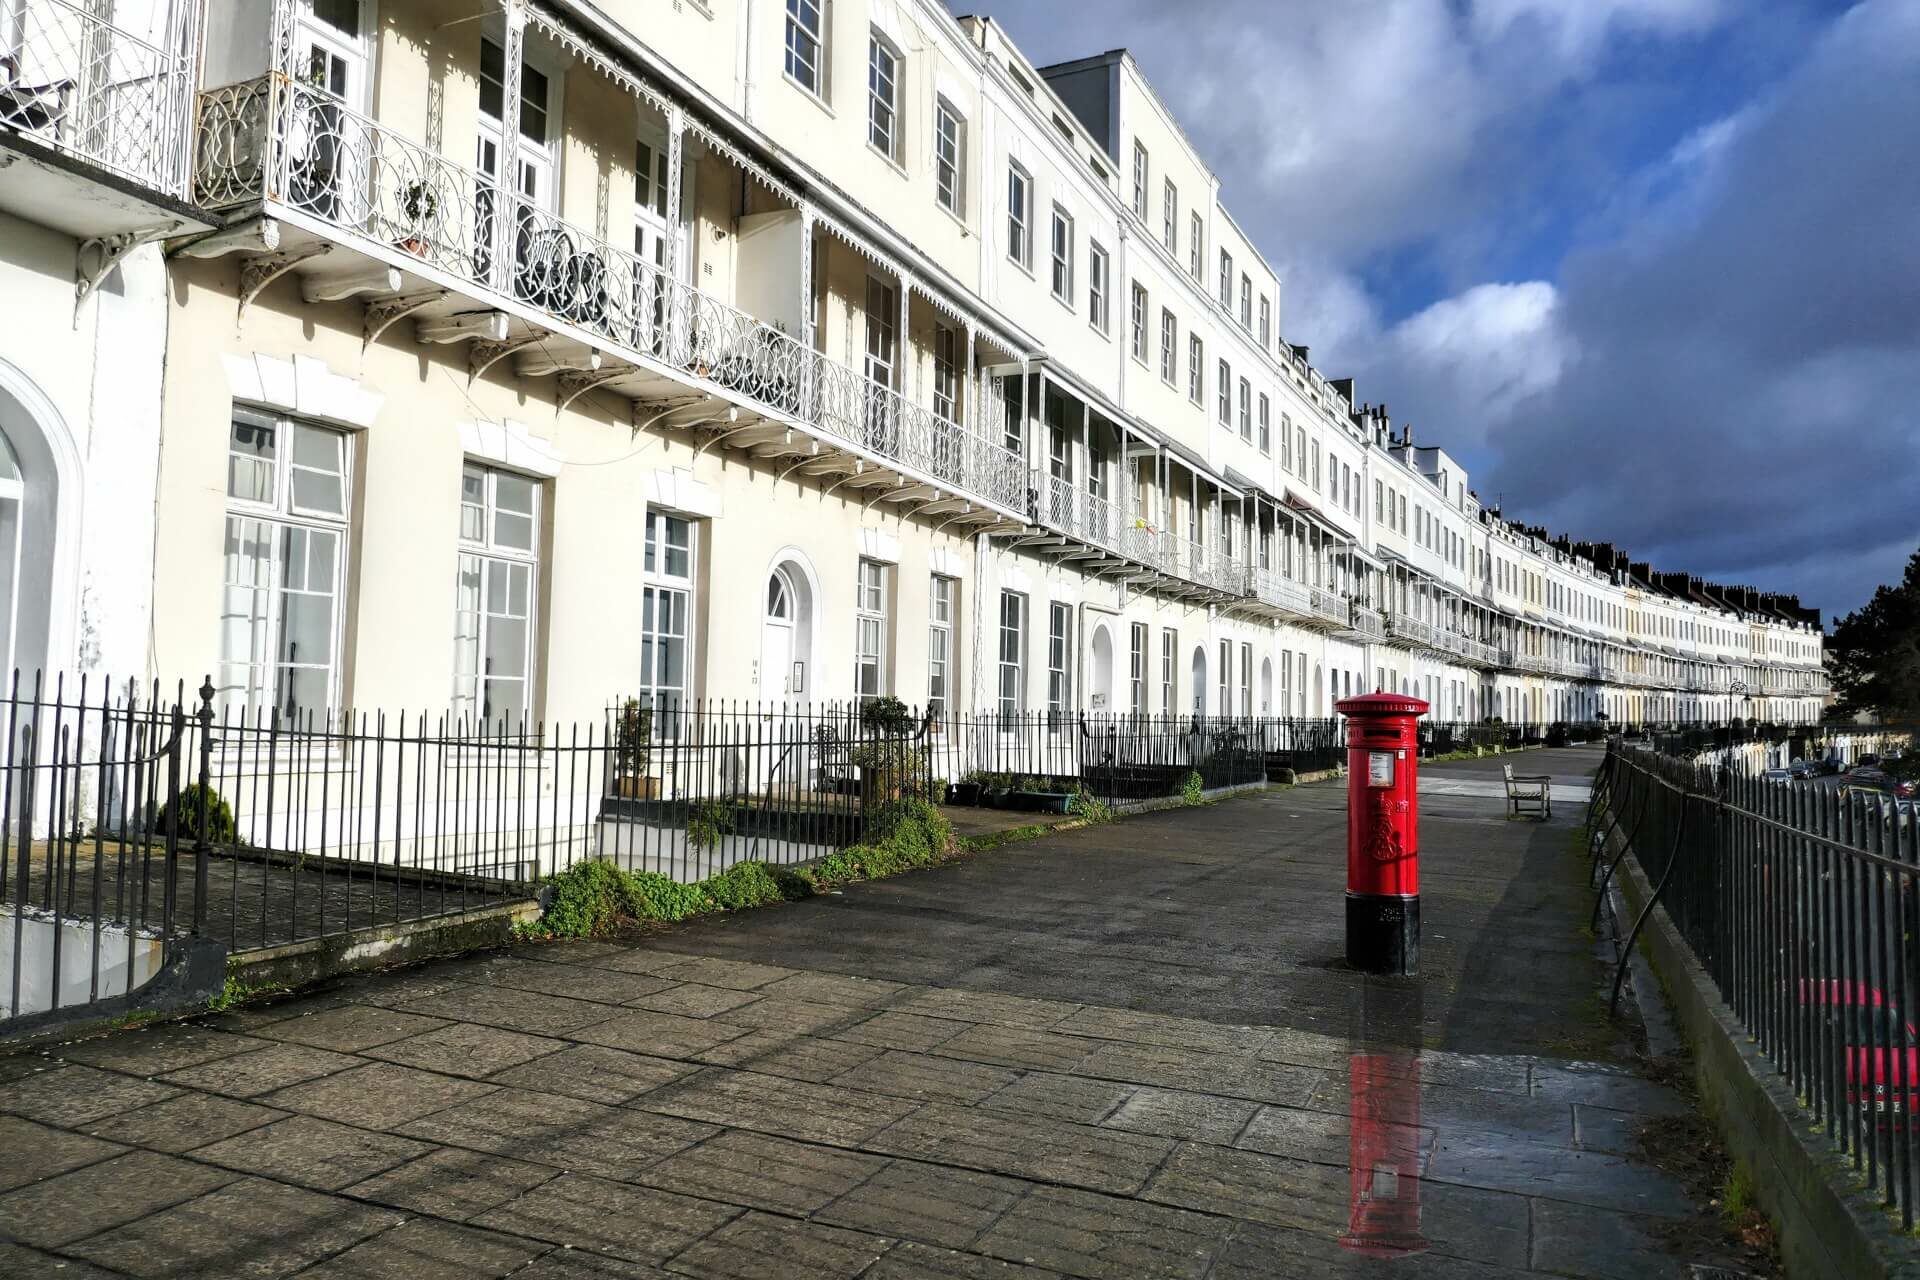 The homes of Royal York Crescent in Clifton, Bristol on a sunny day